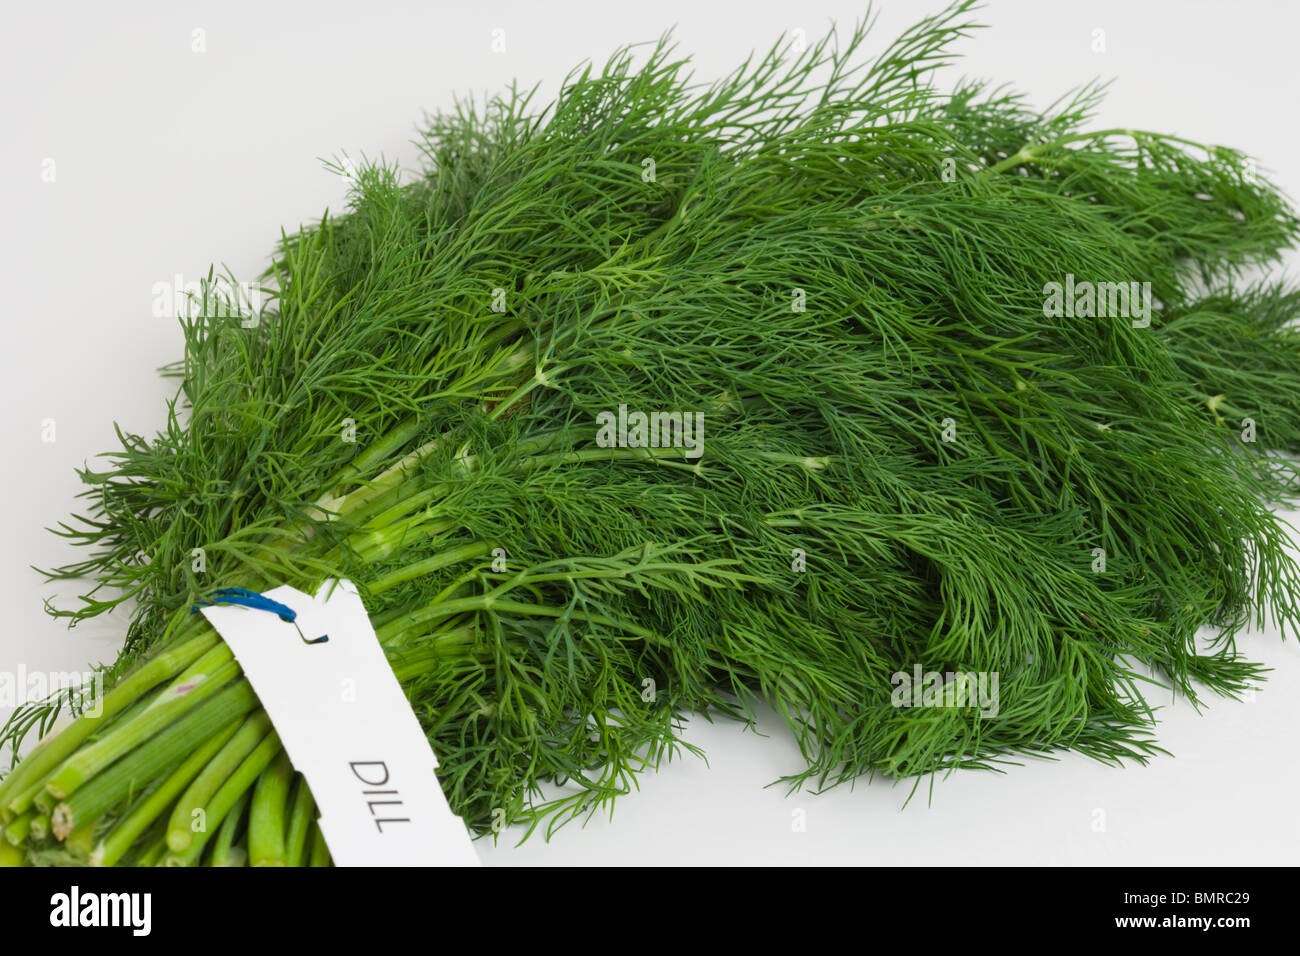 Download Bunch Of Dill Anethum Graveolens Apiaceae Umbelliferae Stock Photo Alamy Yellowimages Mockups